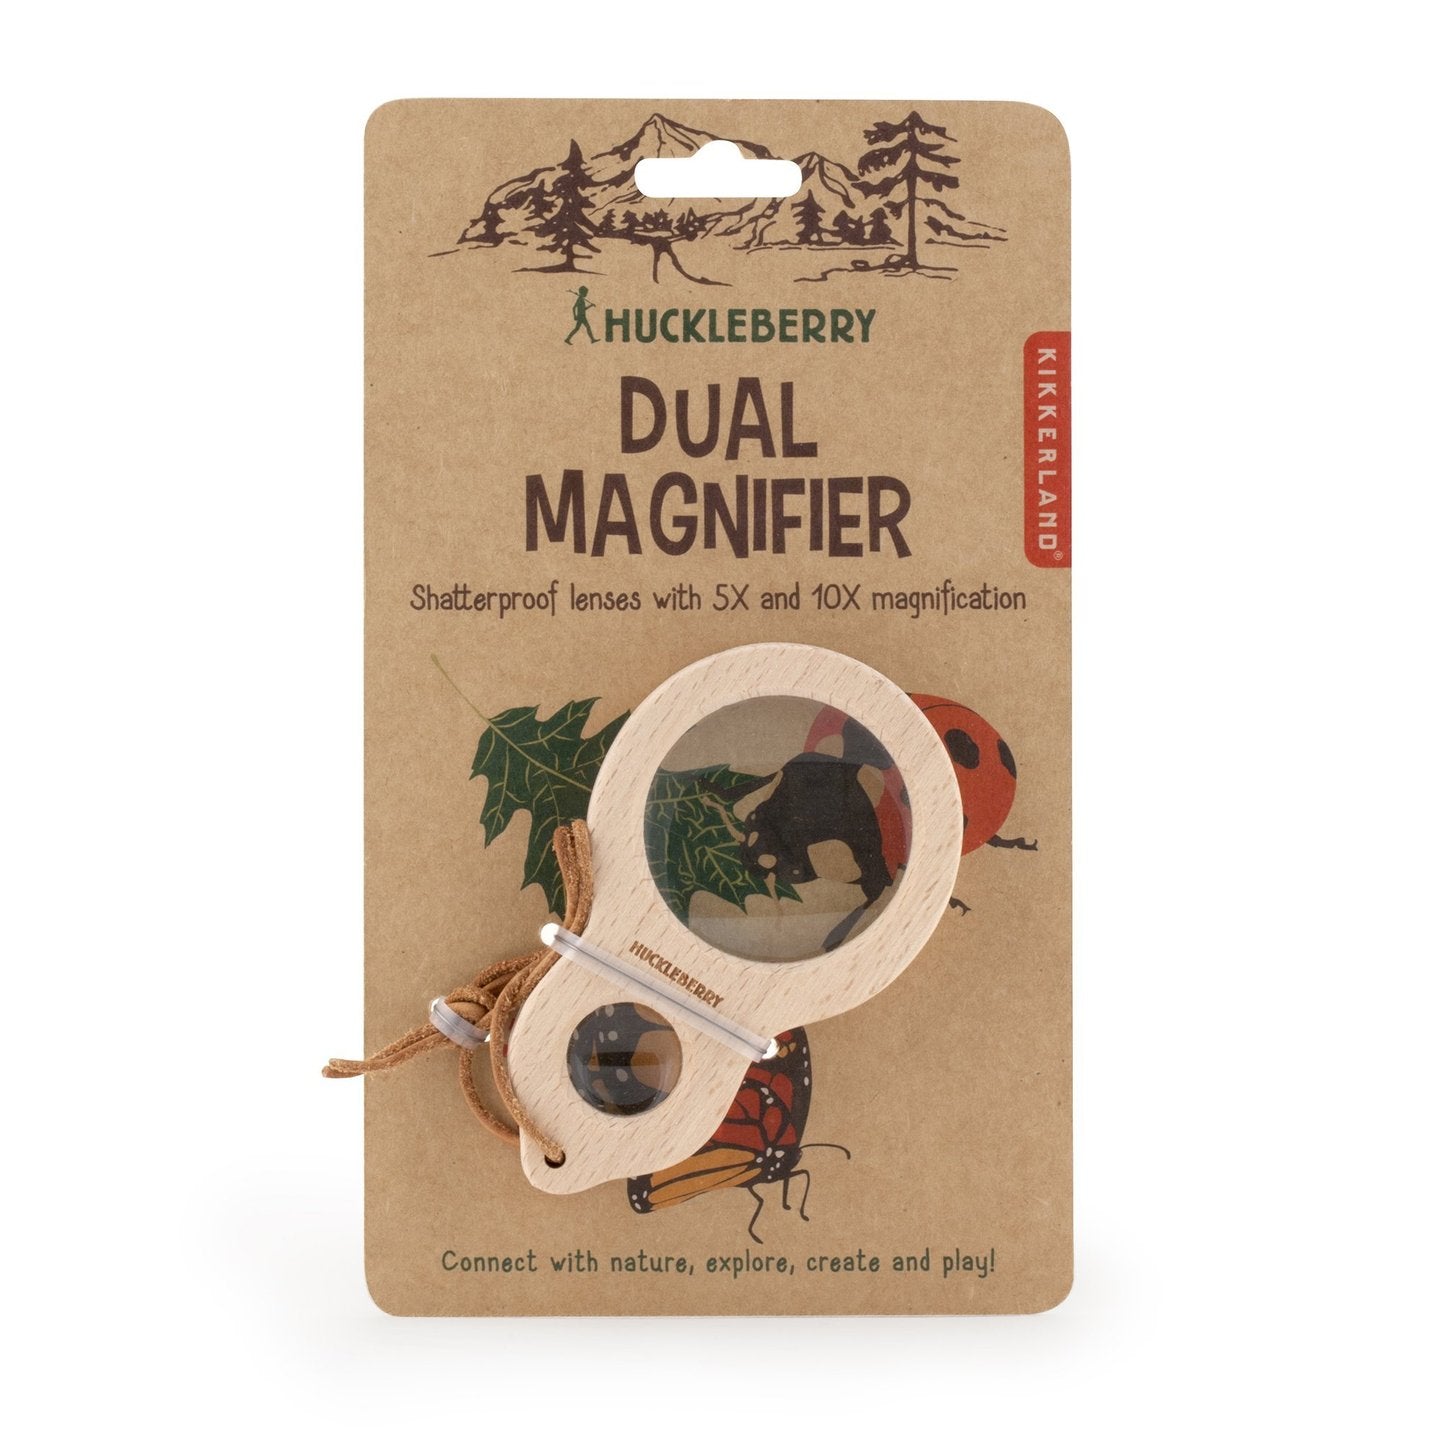 Huckleberry double magnifying glass